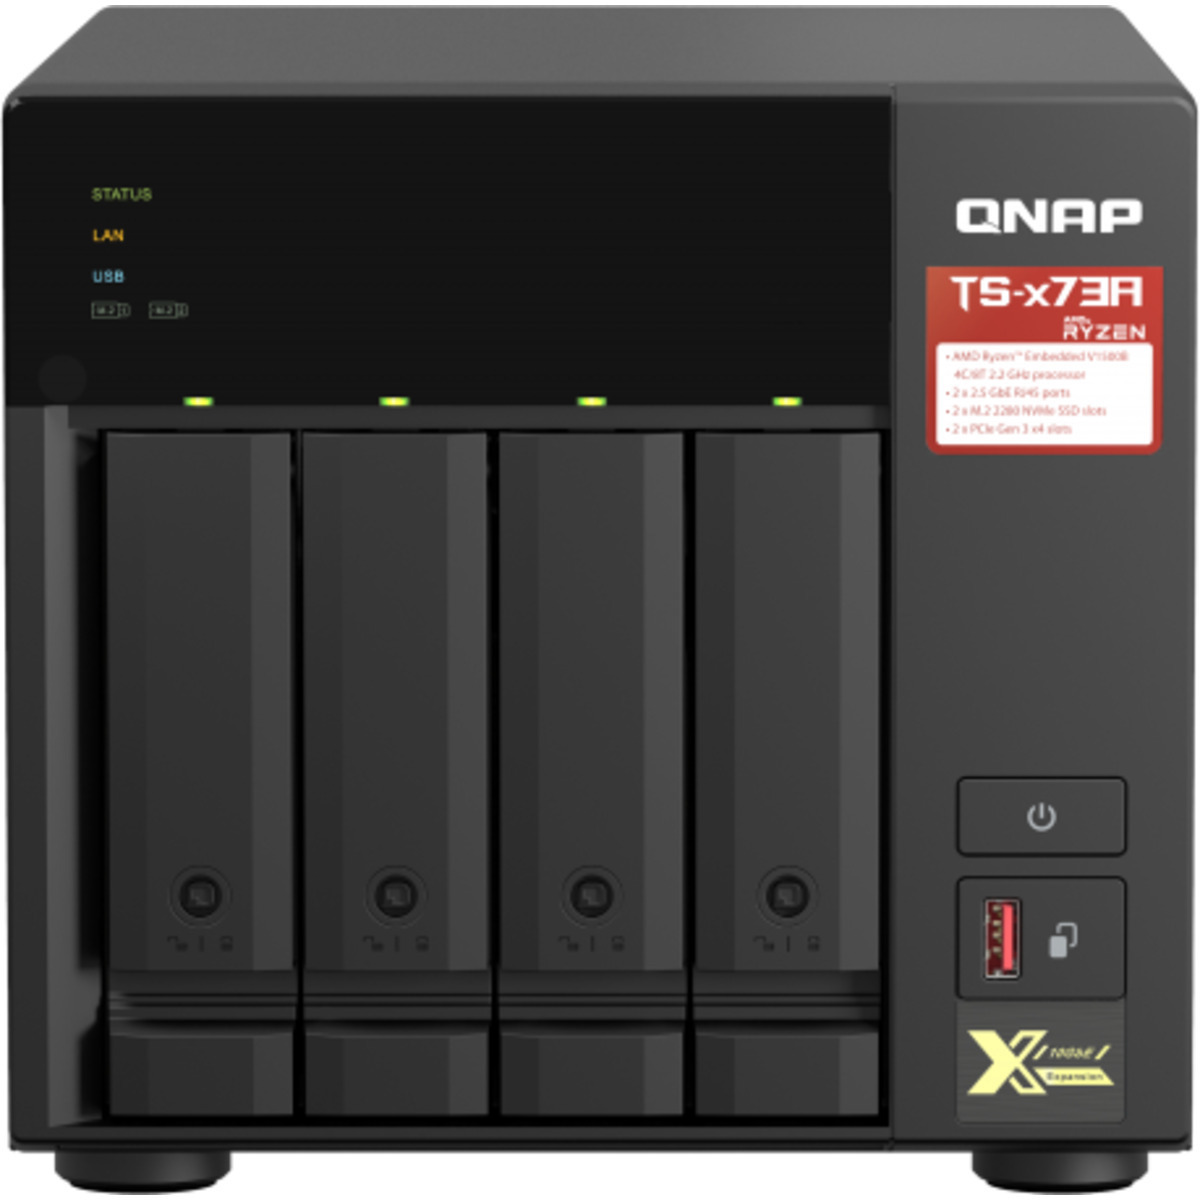 QNAP TS-473A 24tb 4-Bay Desktop Multimedia / Power User / Business NAS - Network Attached Storage Device 4x6tb Western Digital Red Plus WD60EFPX 3.5 5640rpm SATA 6Gb/s HDD NAS Class Drives Installed - Burn-In Tested TS-473A